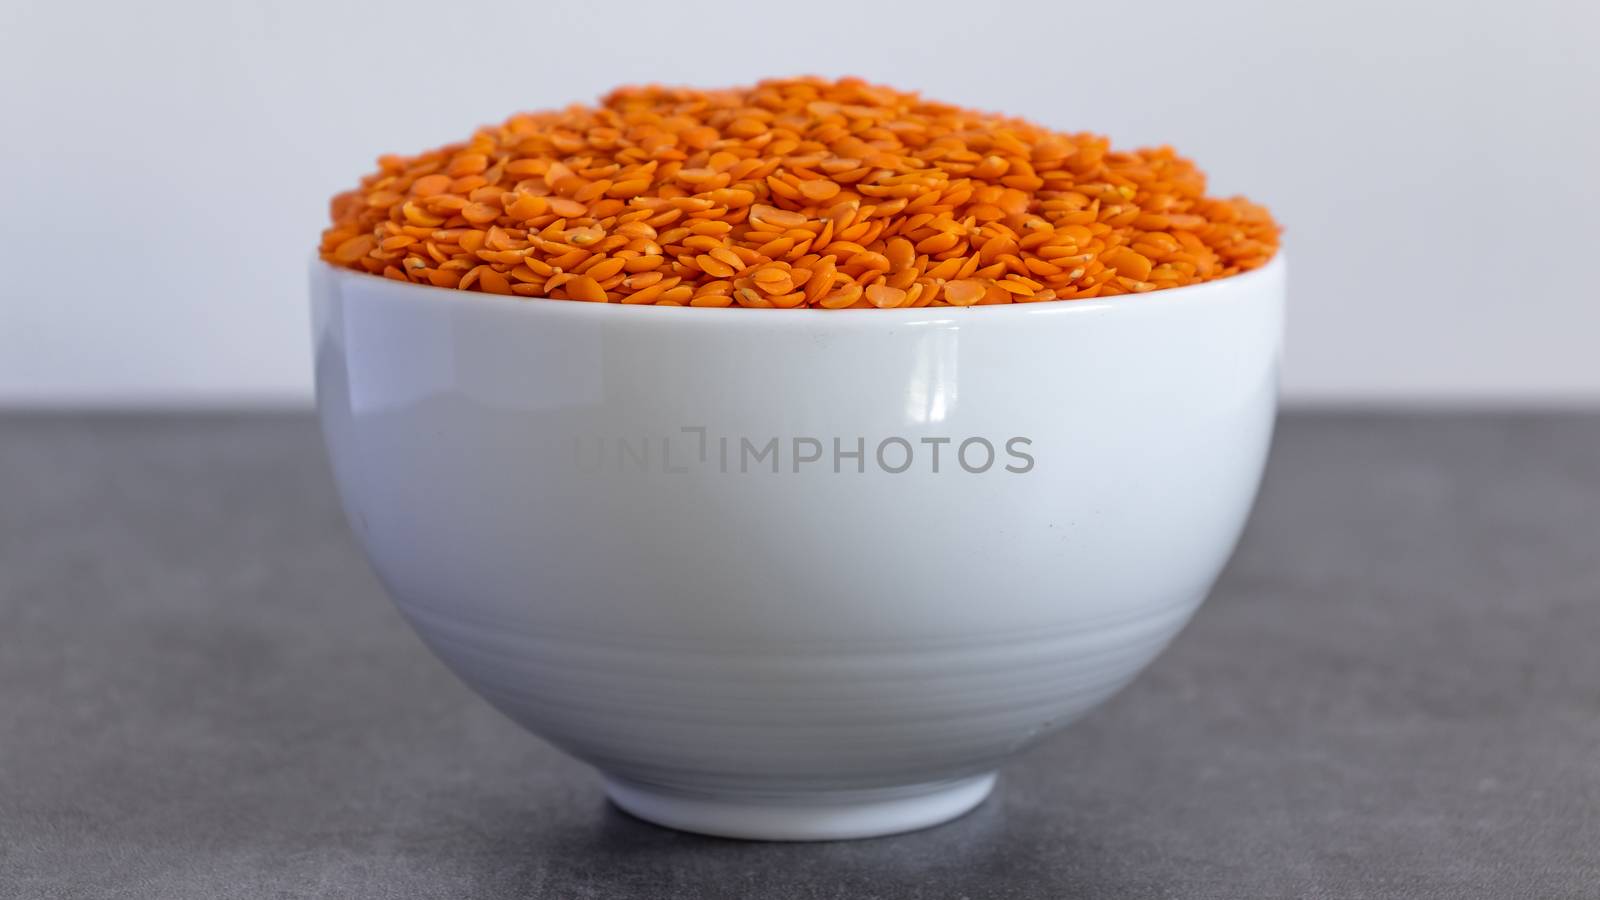 Bowl of Dhal seeds front view Neutral background with negative space to add caption